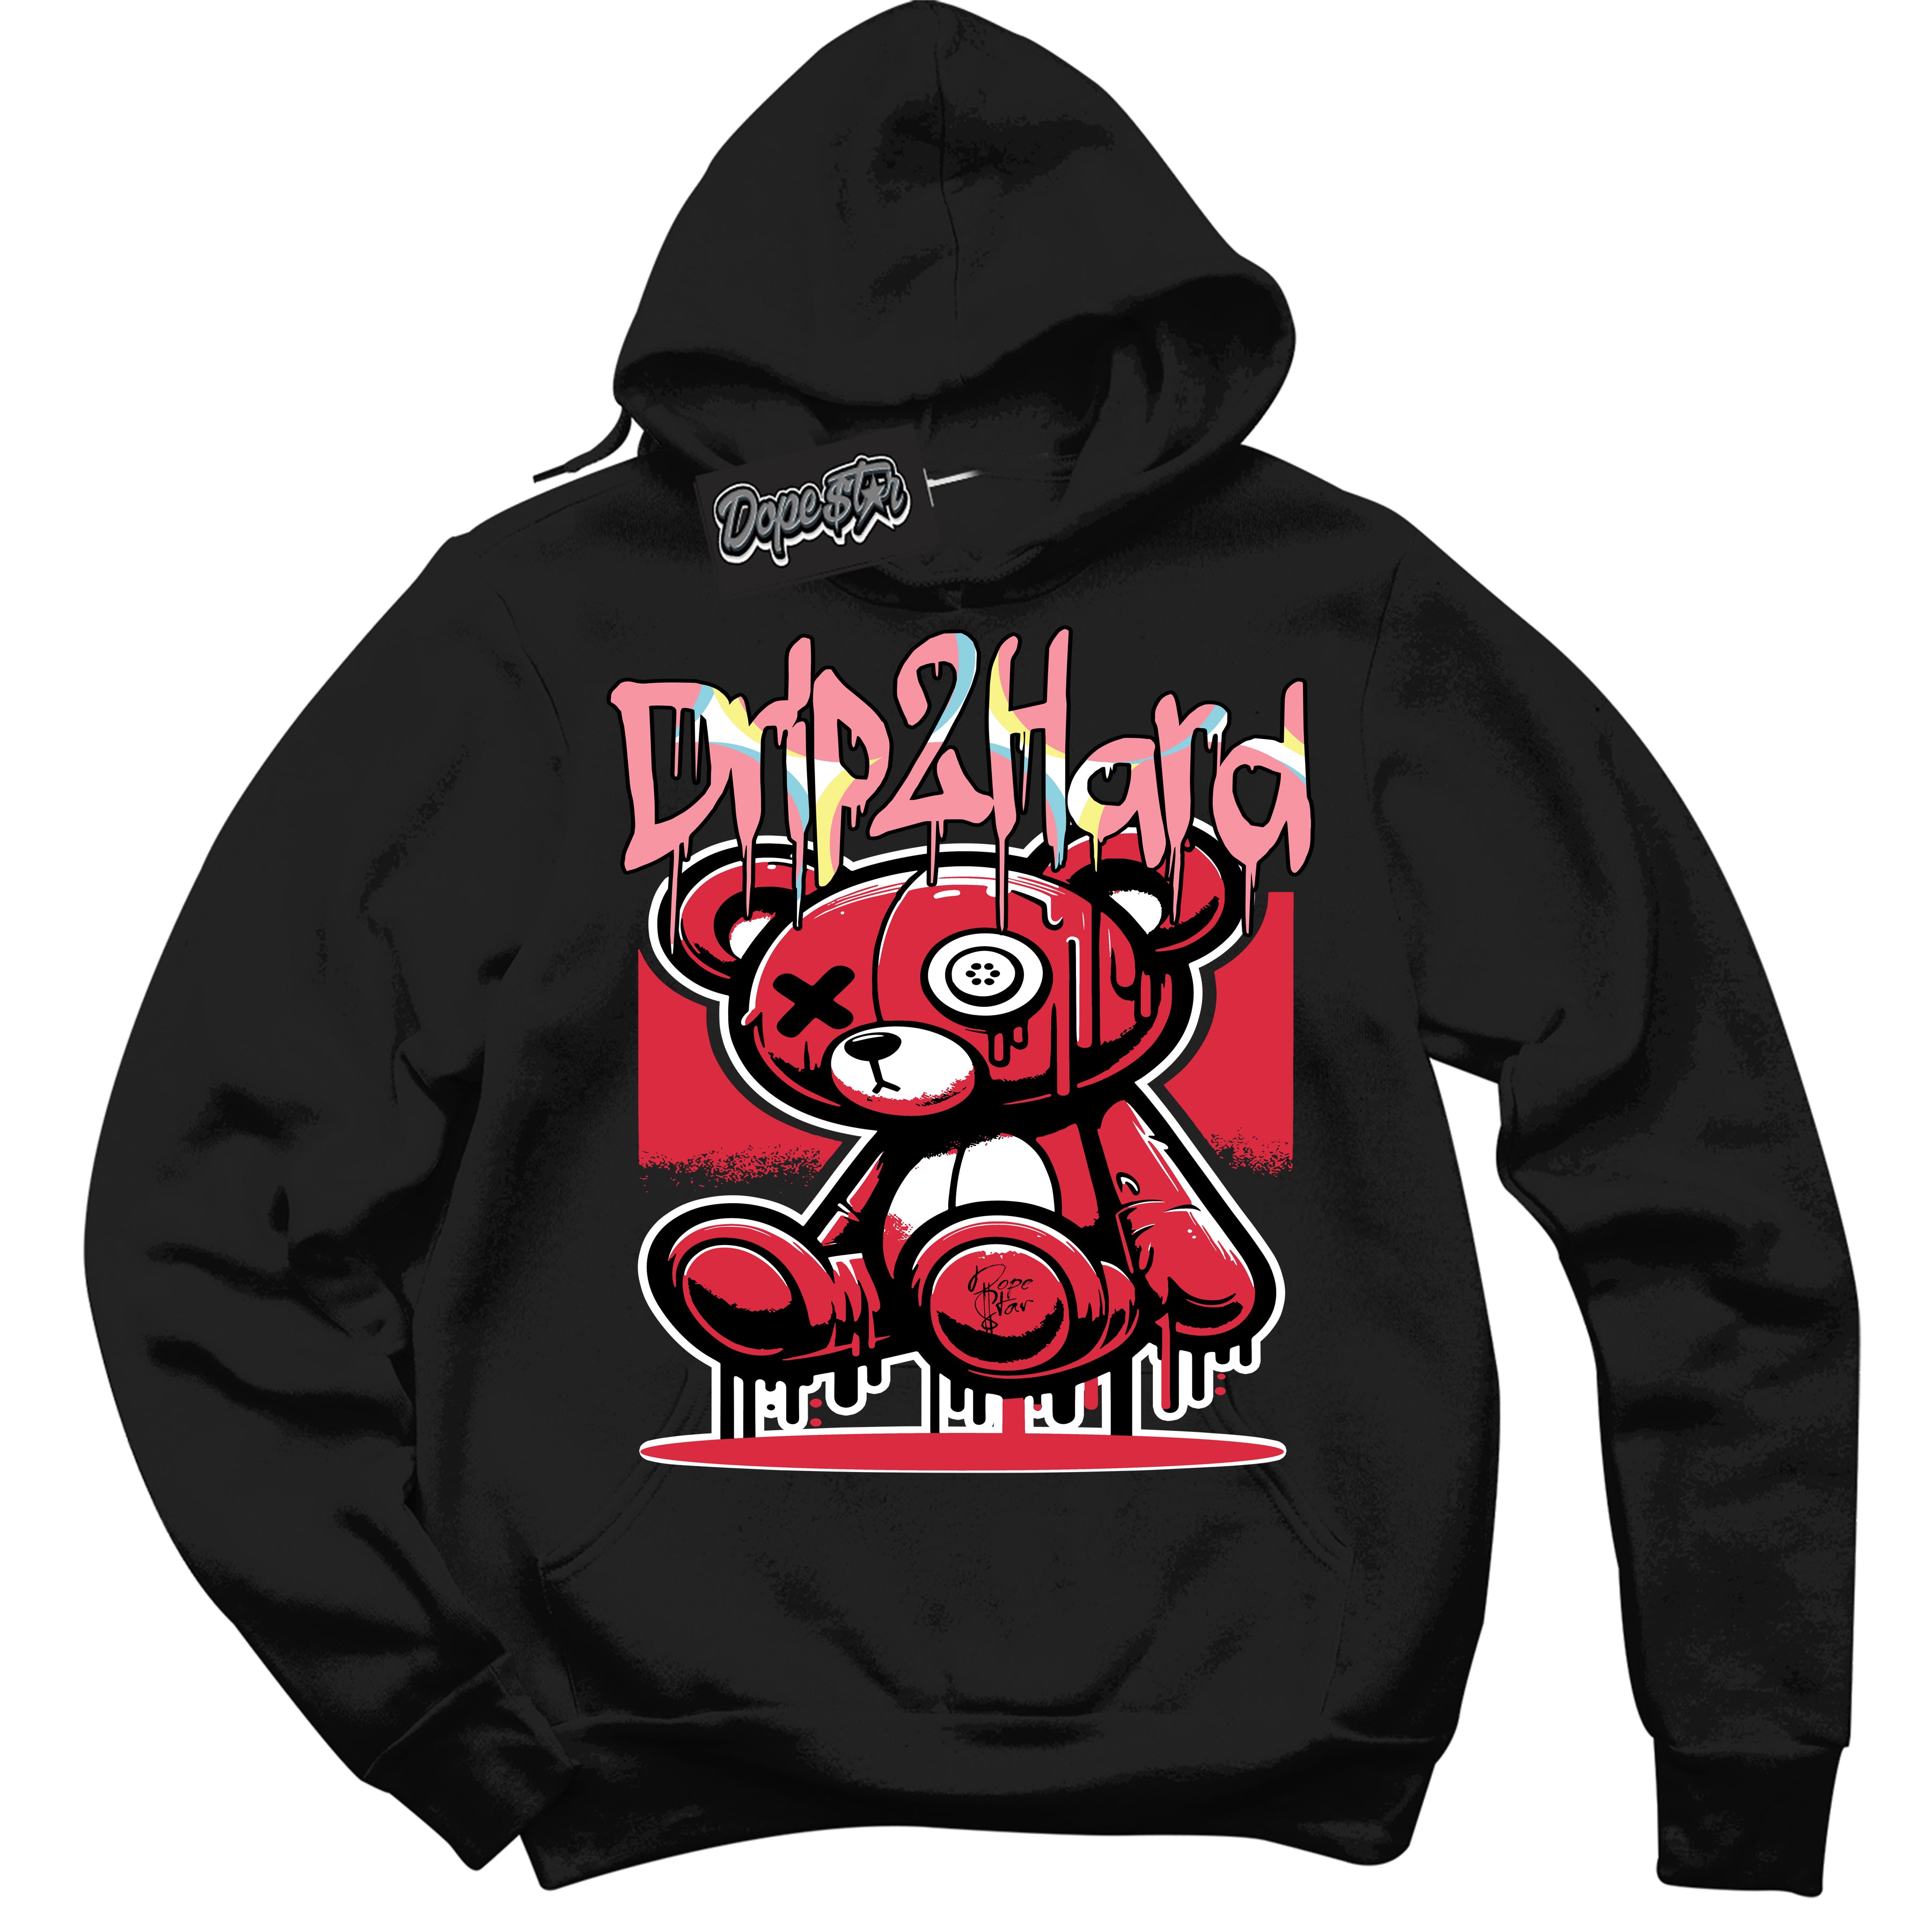 Cool Black Graphic DopeStar Hoodie with “ Drip 2 Hard “ print, that perfectly matches Spider-Verse 1s sneakers